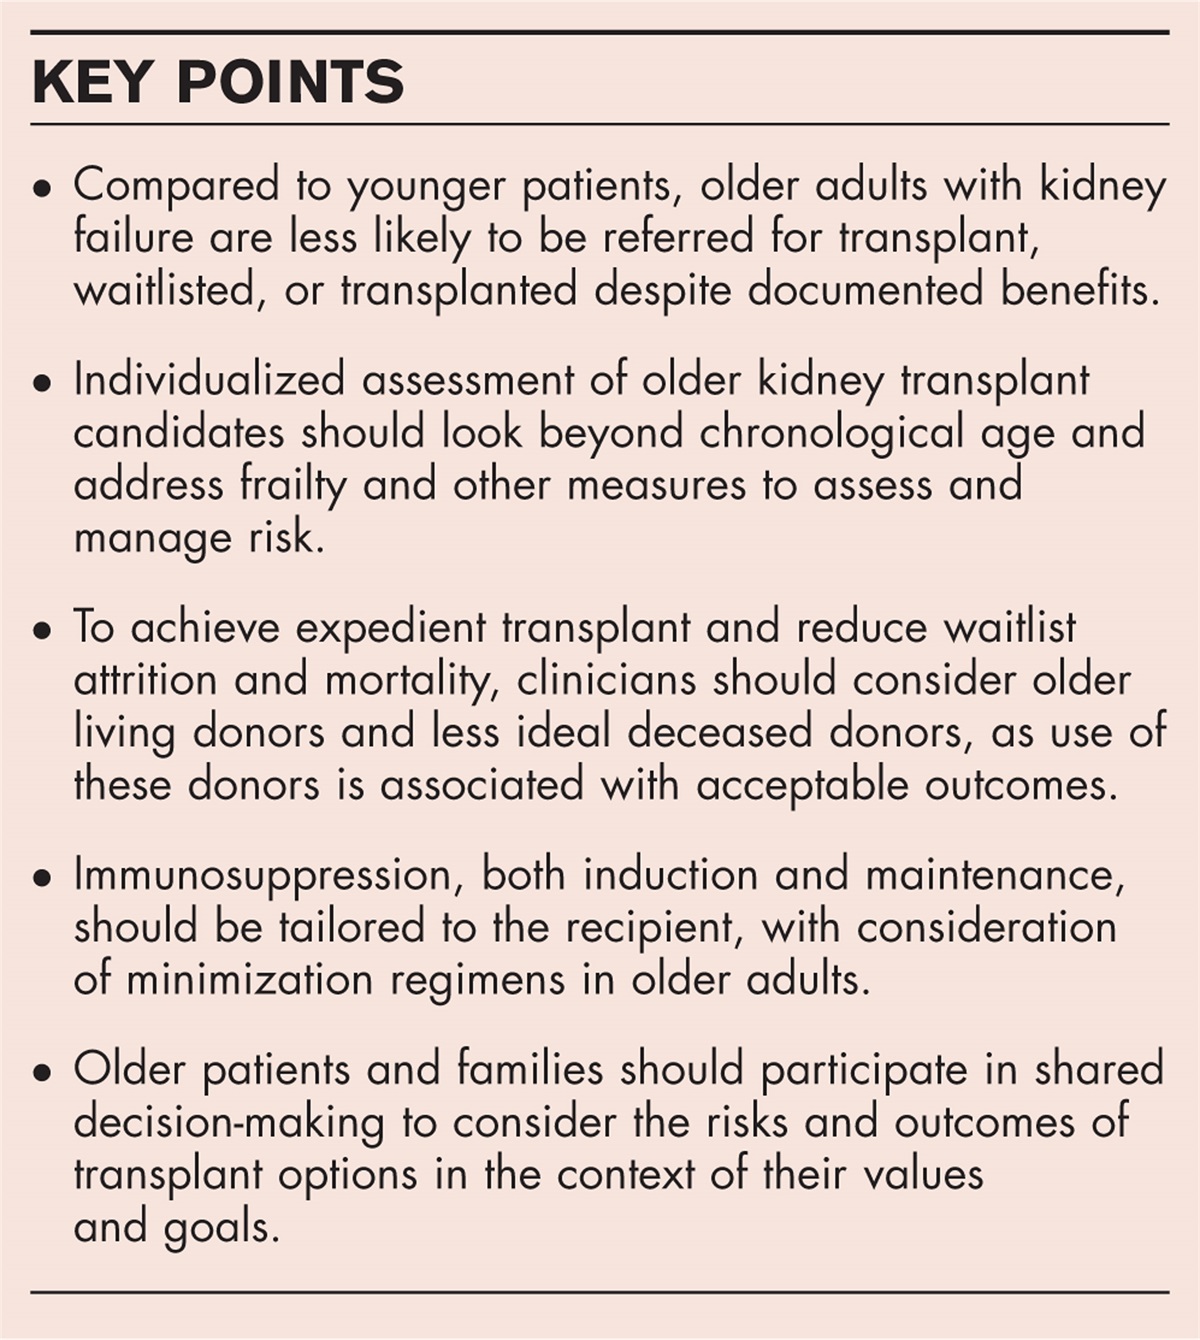 Maximizing opportunities for kidney transplantation in older adults